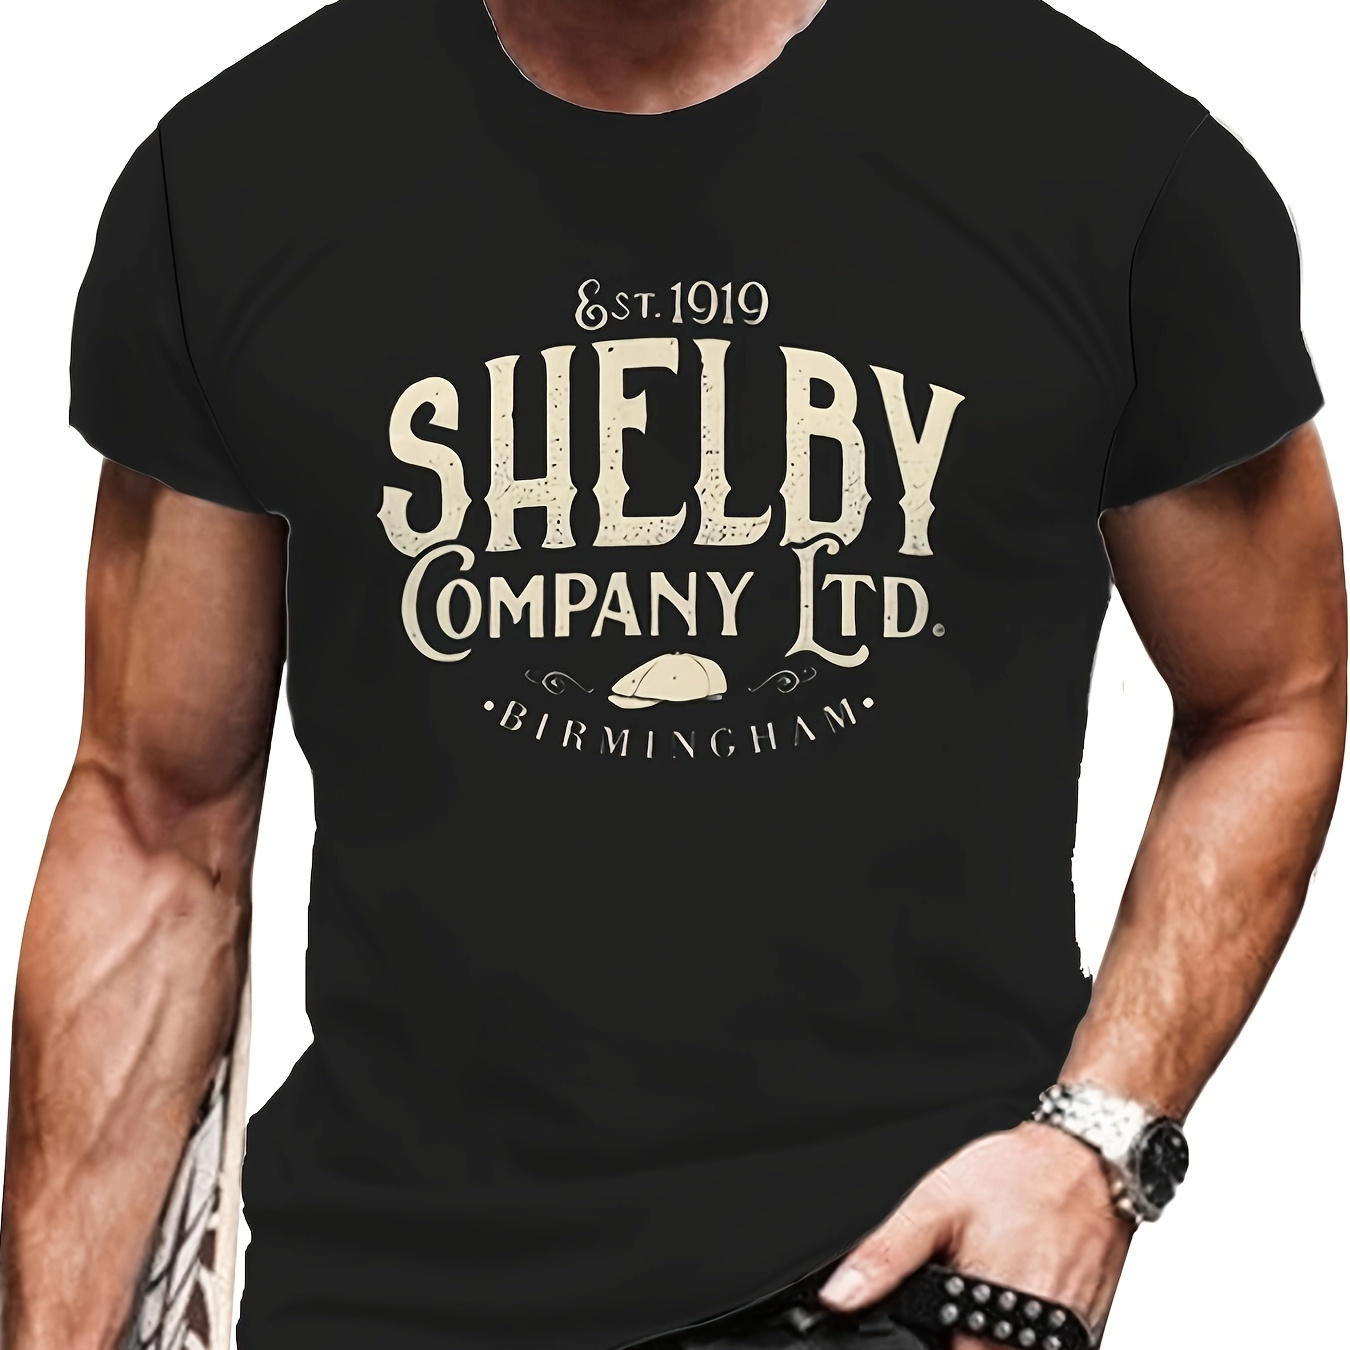 

Plus Size Men's Shelby Graphic Print T-shirt For Summer, Stylish Novelty Short Sleeve Tees For Males, Street Style Tops